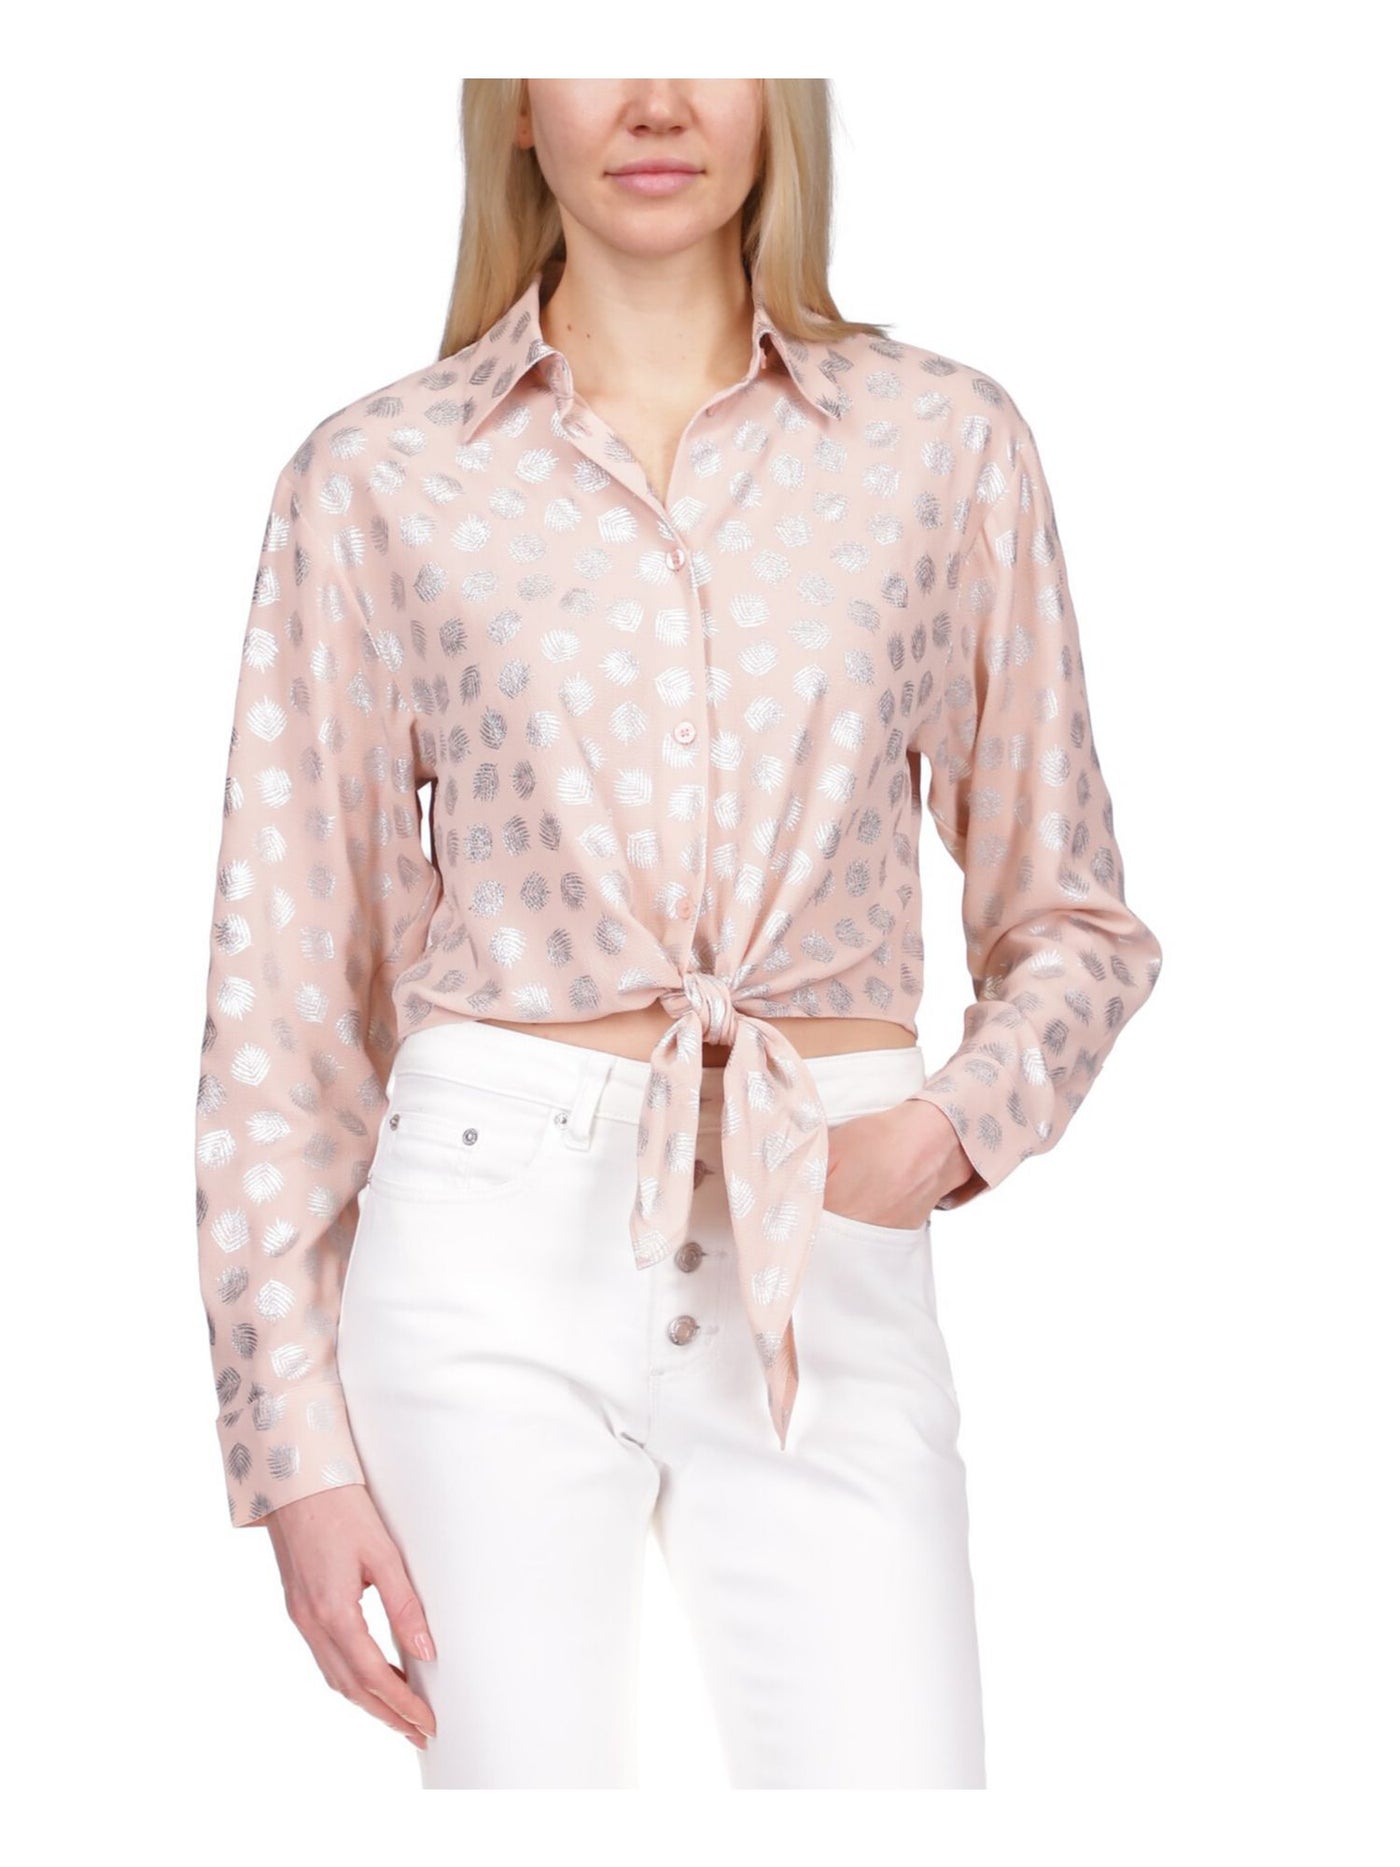 MICHAEL KORS Womens Pink Short Length Tie Hem Unlined Printed Cuffed Sleeve Collared Button Up Top L